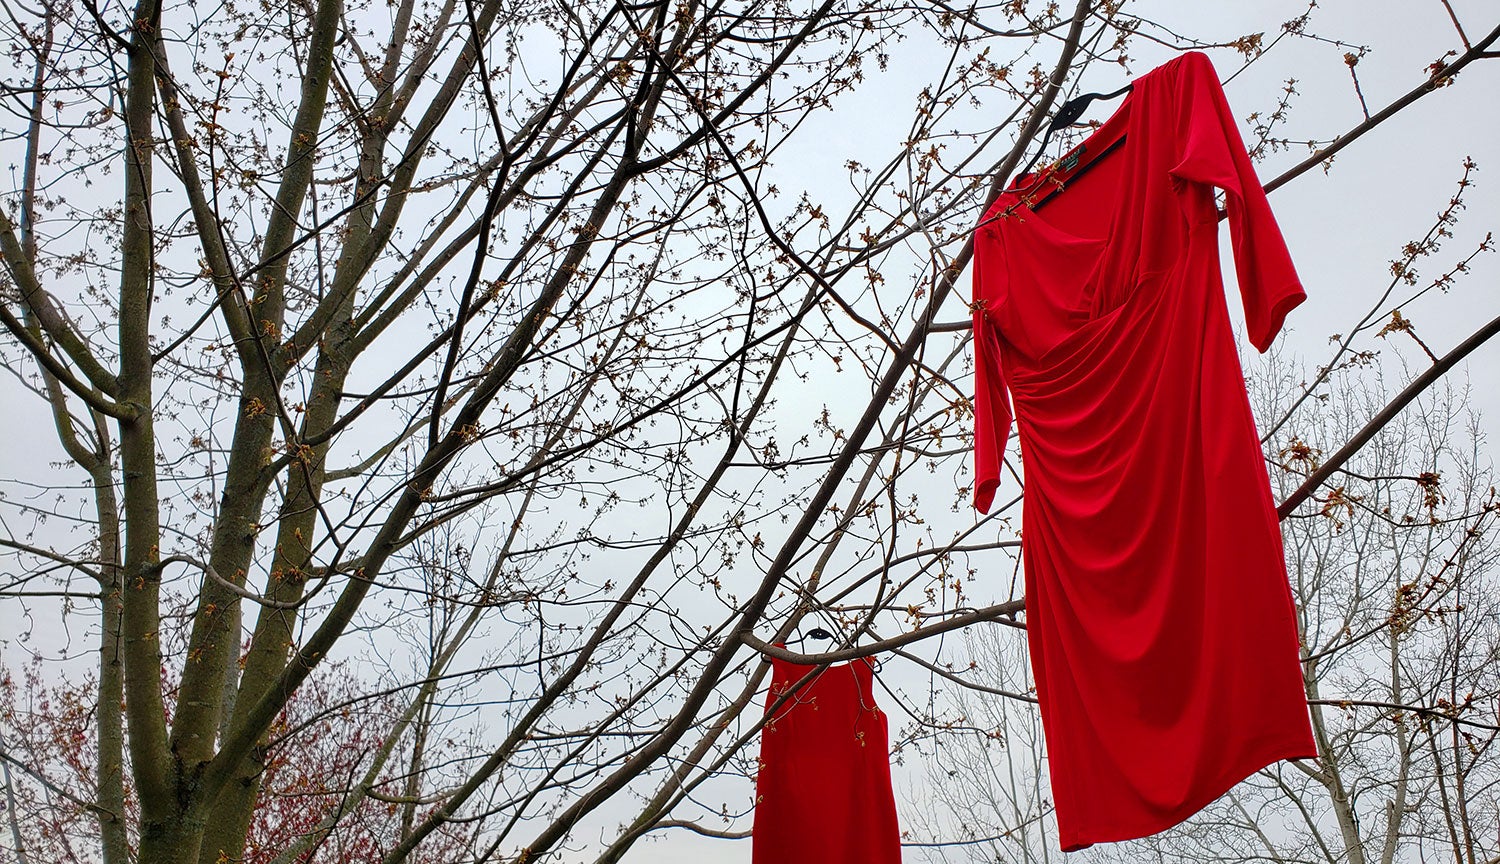 Red dress hanging in tree.